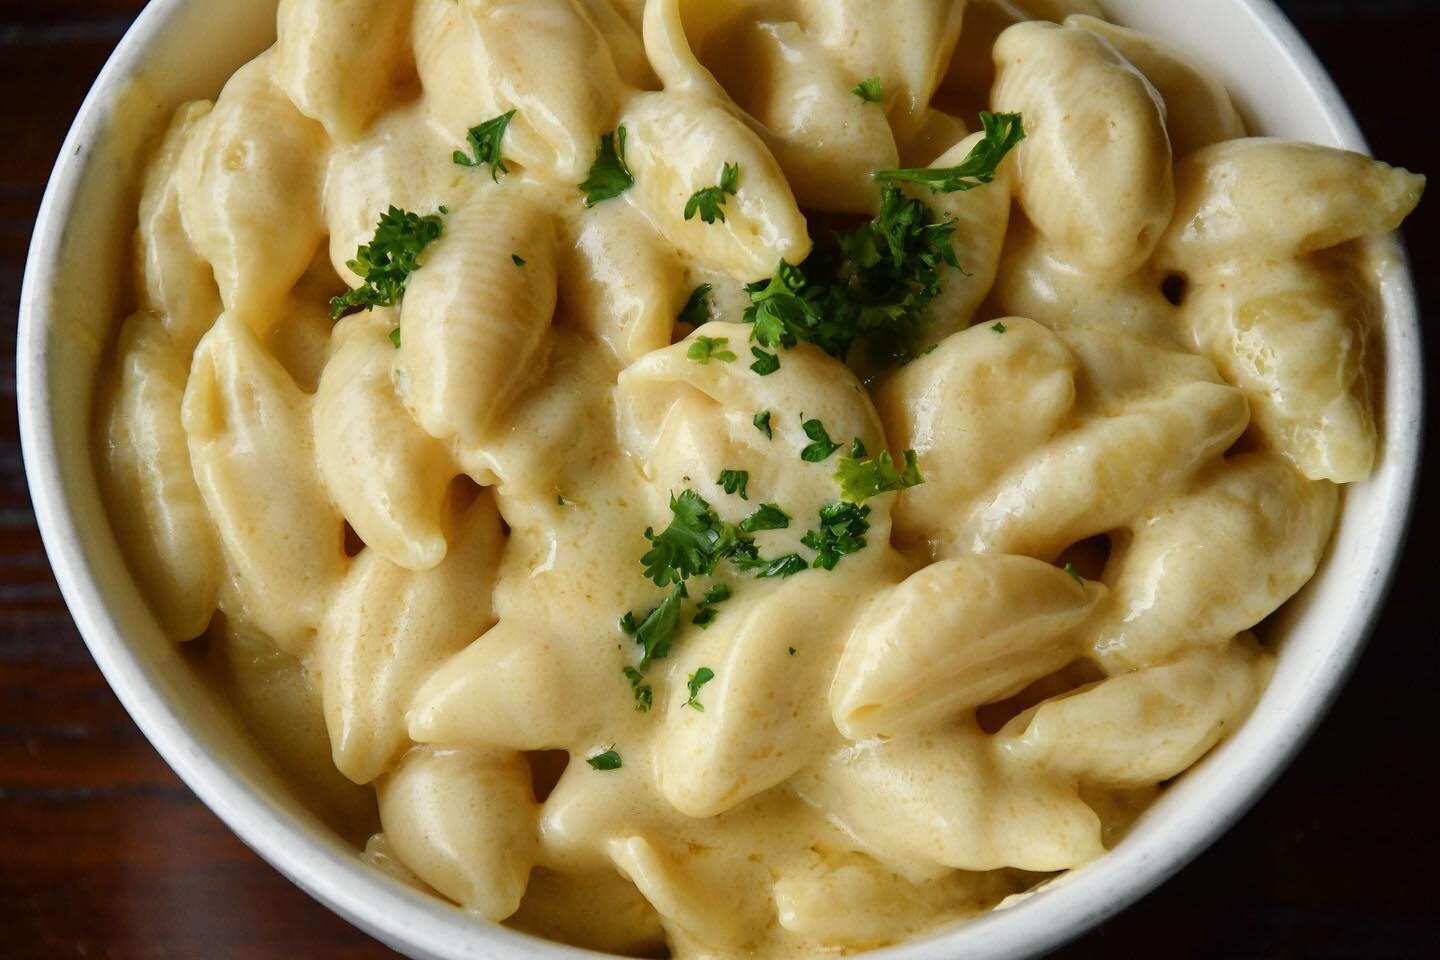 Serving up good food and craft cocktails all day today from 11:30am-9pm with indoor/outdoor dining and online ordering/curbside pick-up. Stop in and see us at the Shoe! #macandcheese #getinmybelly #yum #craftdistillery #distillery #craftcocktails #co